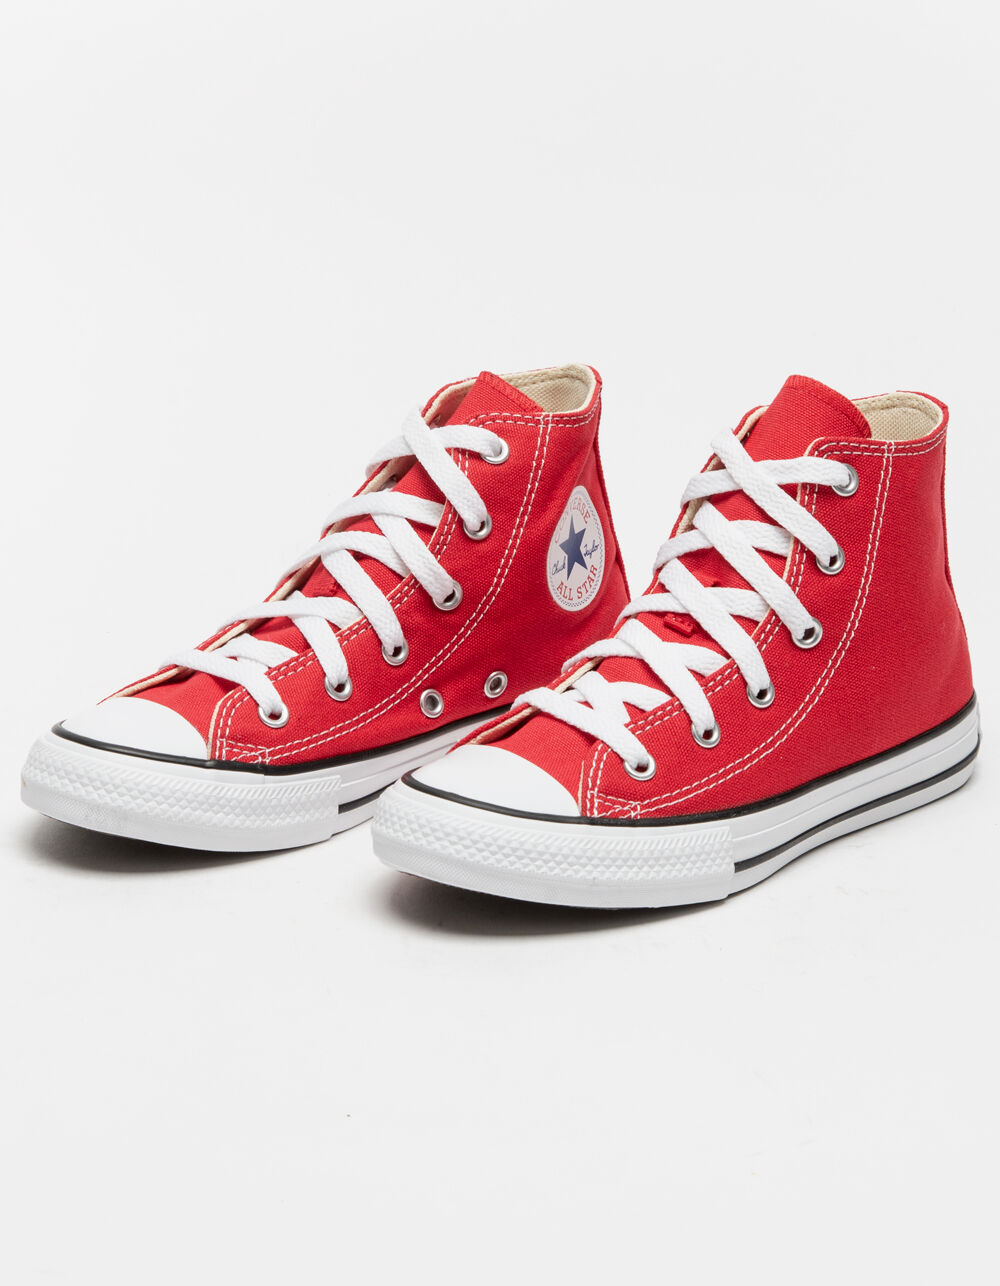 CONVERSE Chuck Taylor All Star High Top Kids Shoes